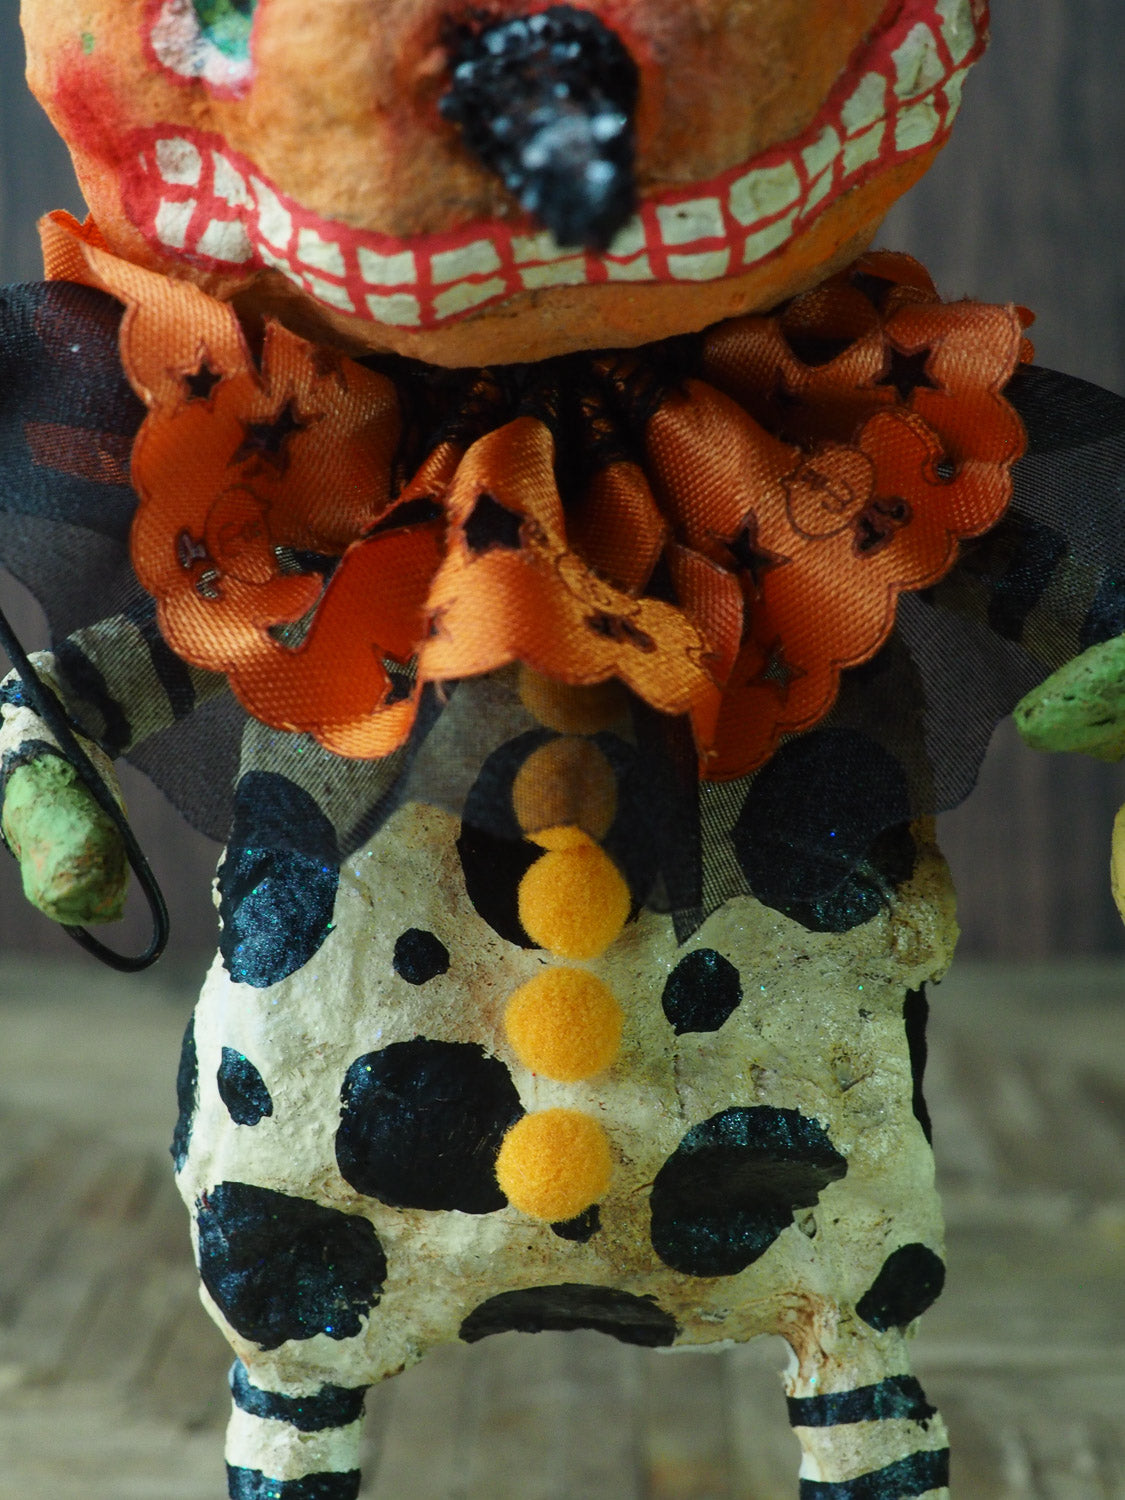 Original Halloween art doll original creation by Danita Art. Paper Clay, sculpted and painted in a spooky whimsical unique work of art. jack-o-lantern pumpkin skull spun cotton.